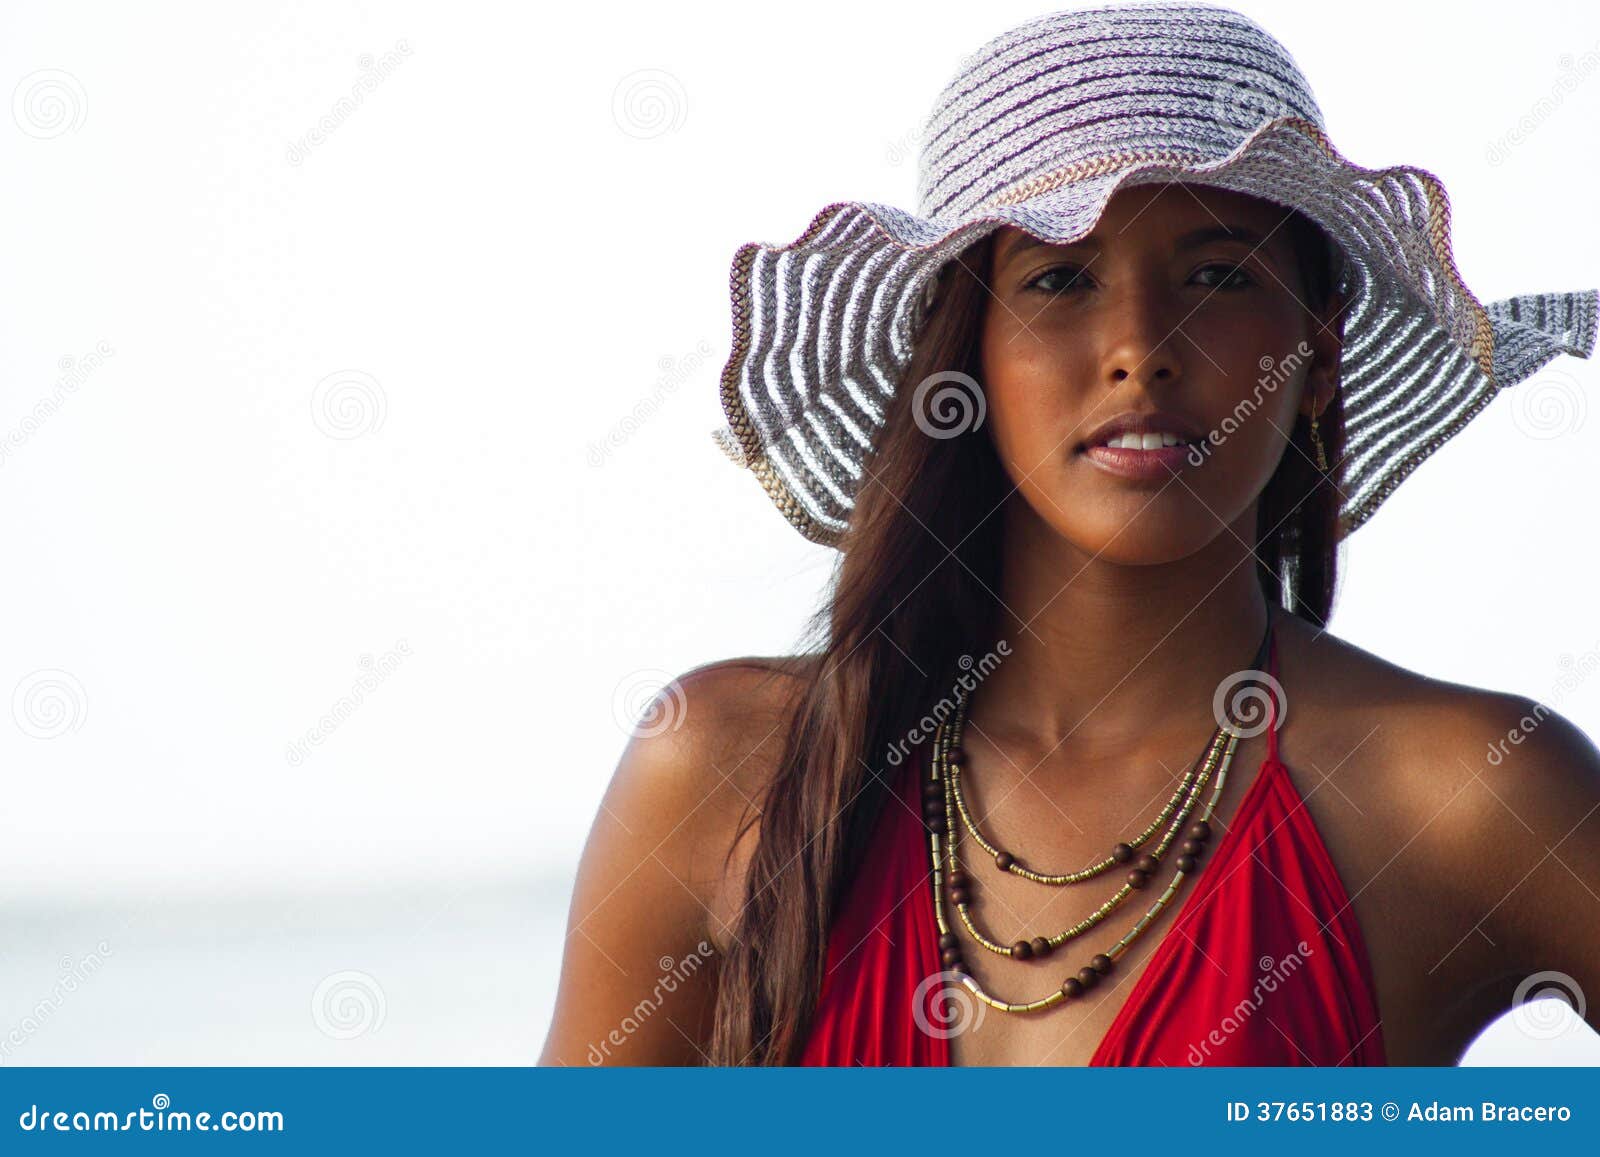 Young Hispanic Woman in Sun Hat at Beach Stock Image - Image of rican,  caribbean: 37651883